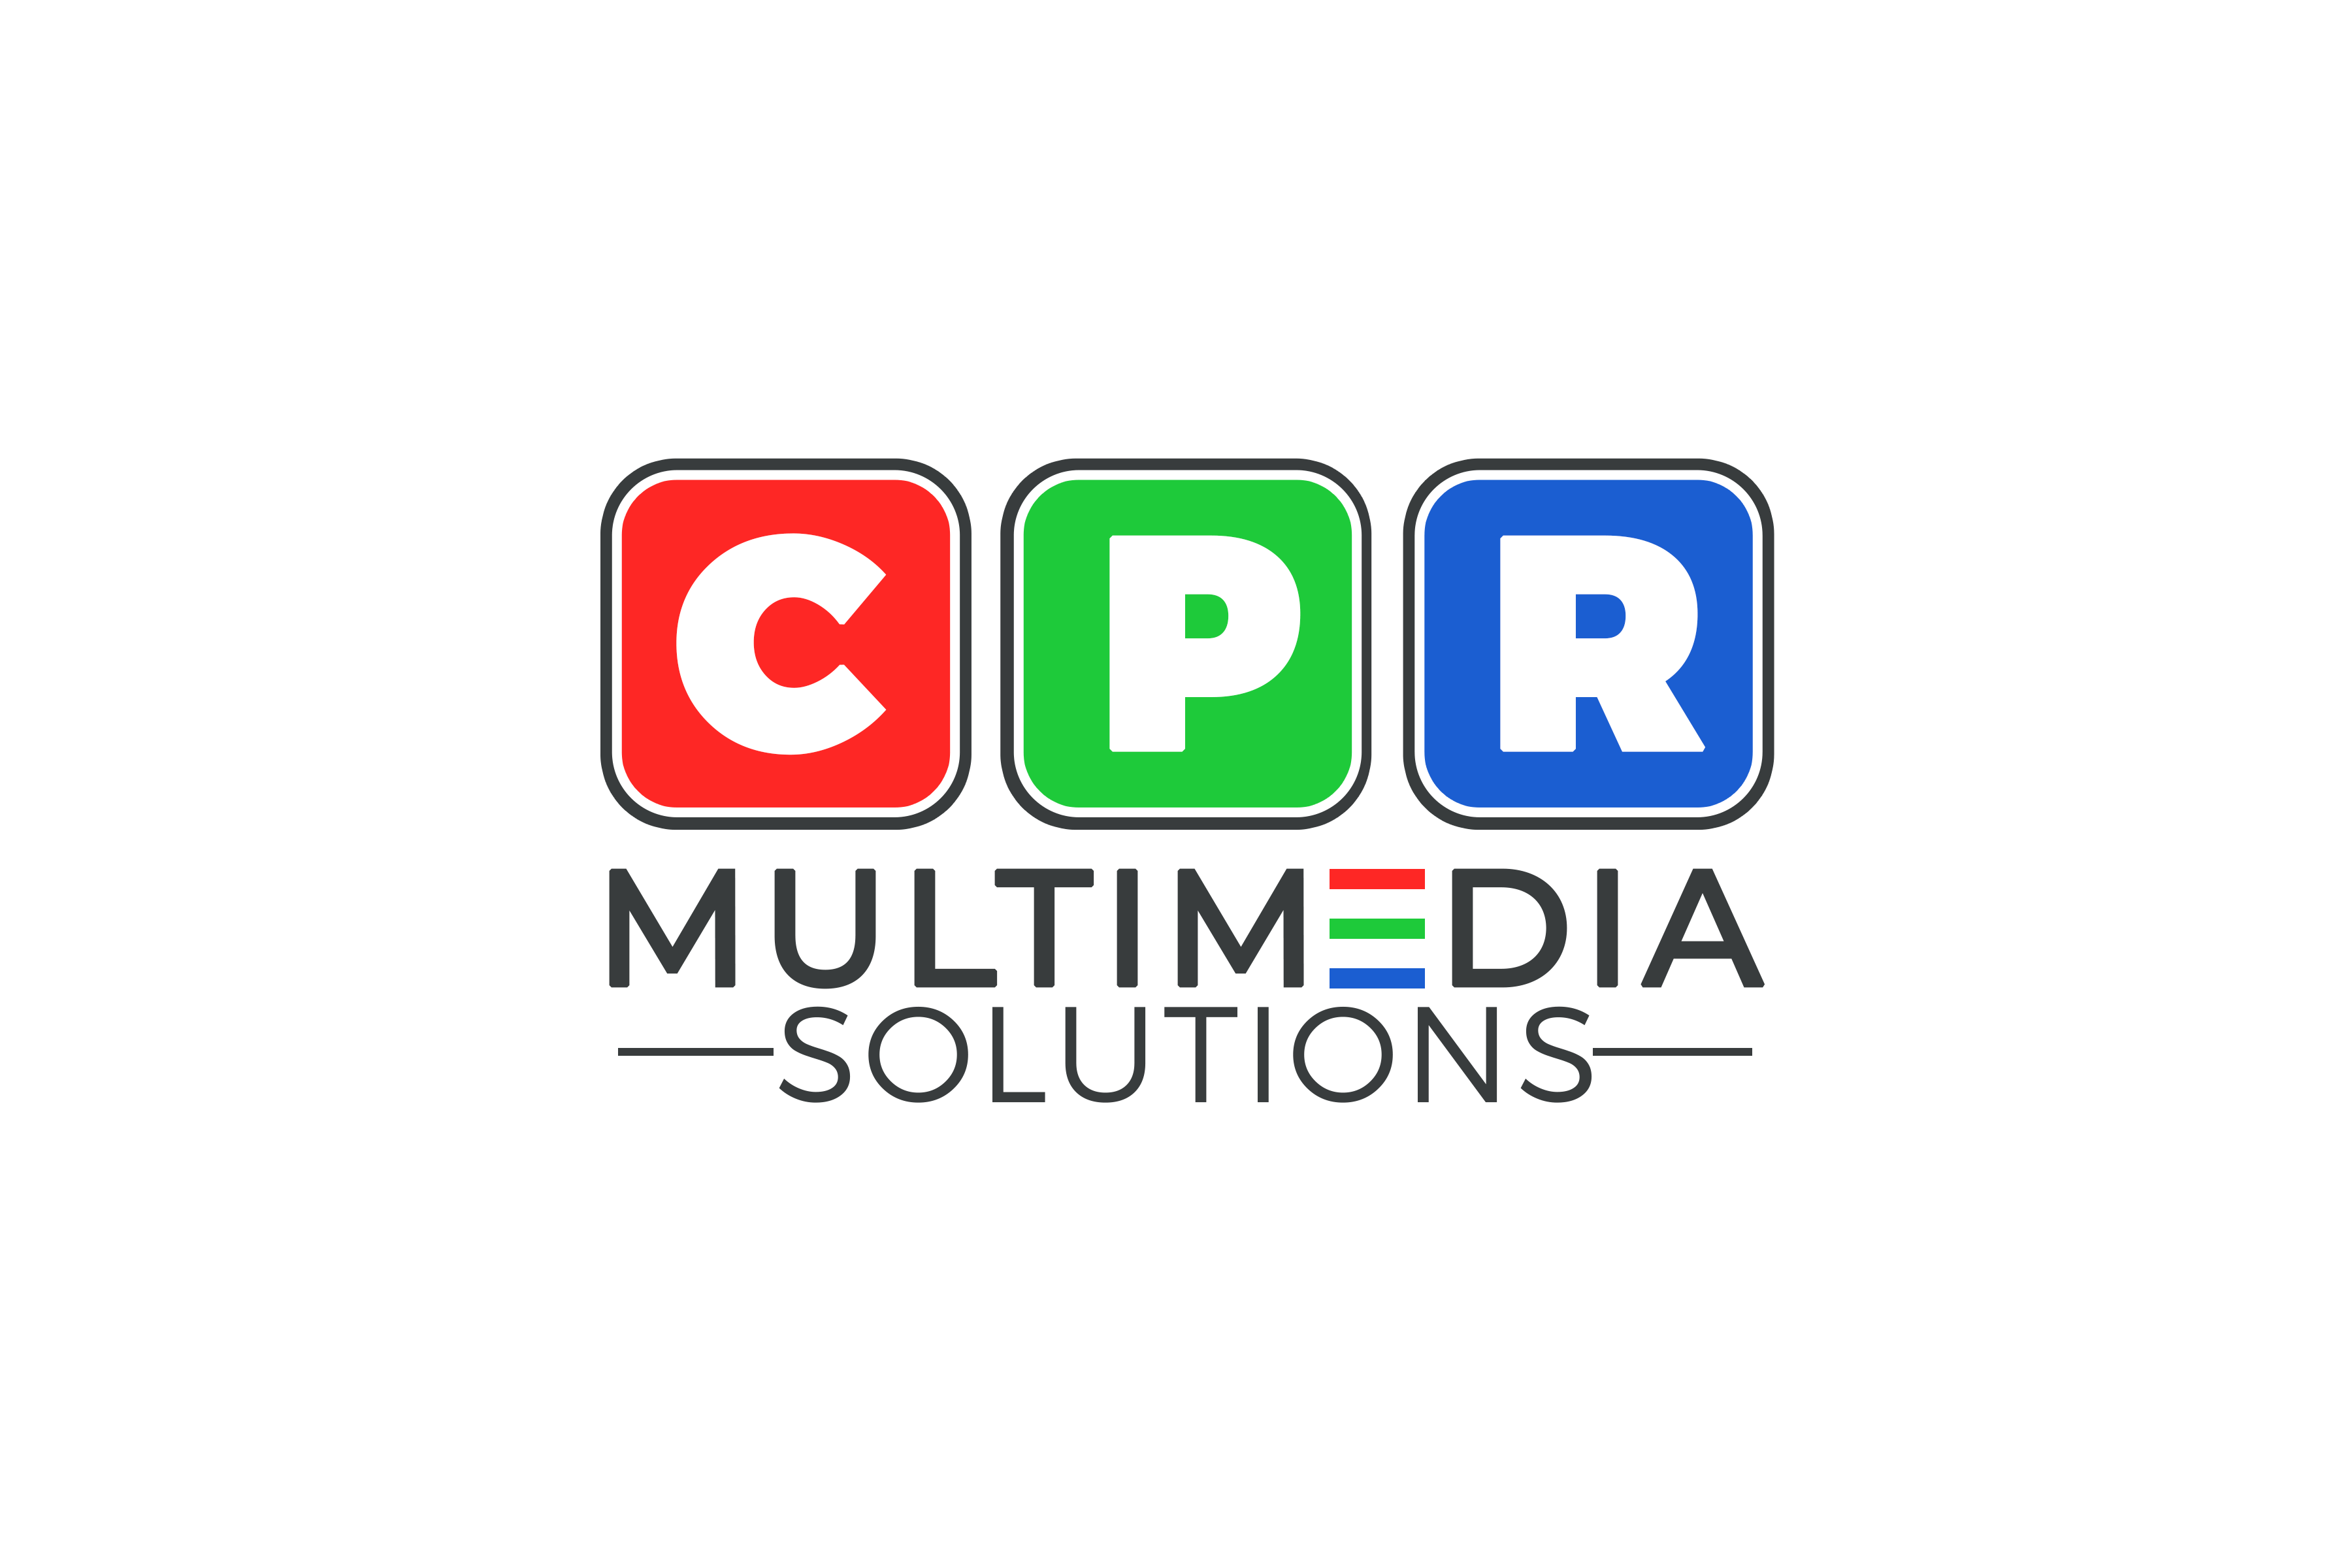 CPR Logo - CPR MultiMedia Solutions Forms and Logos